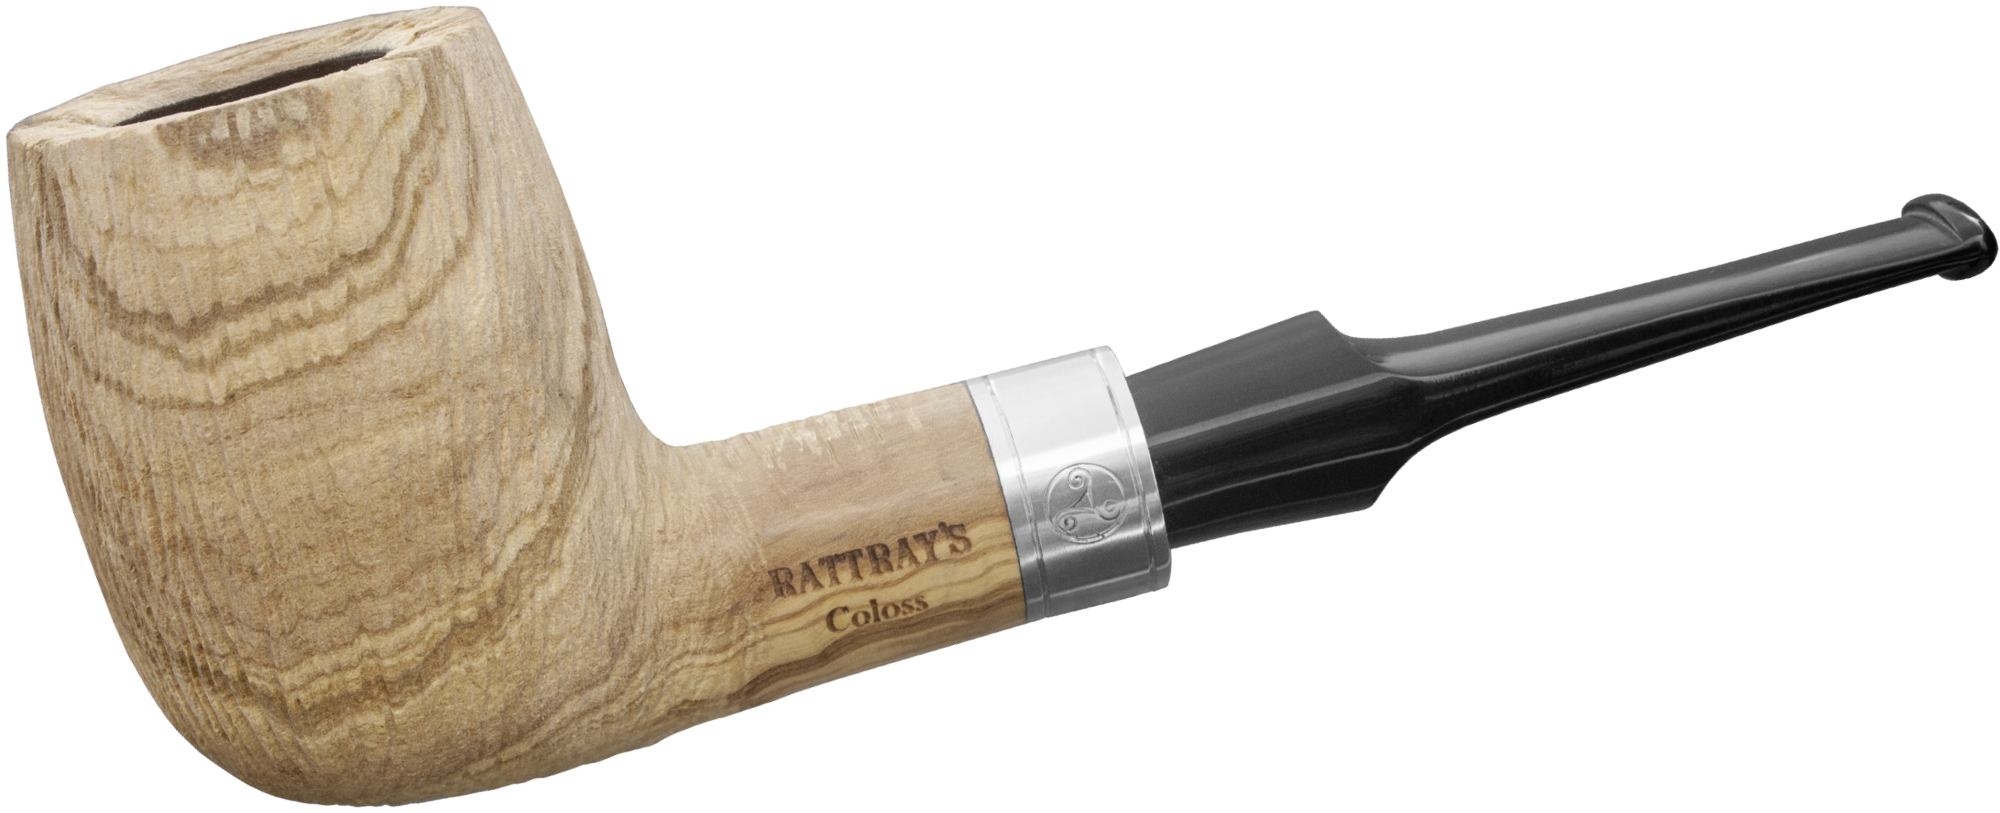 Rattray's Coloss Olive Brushed 147